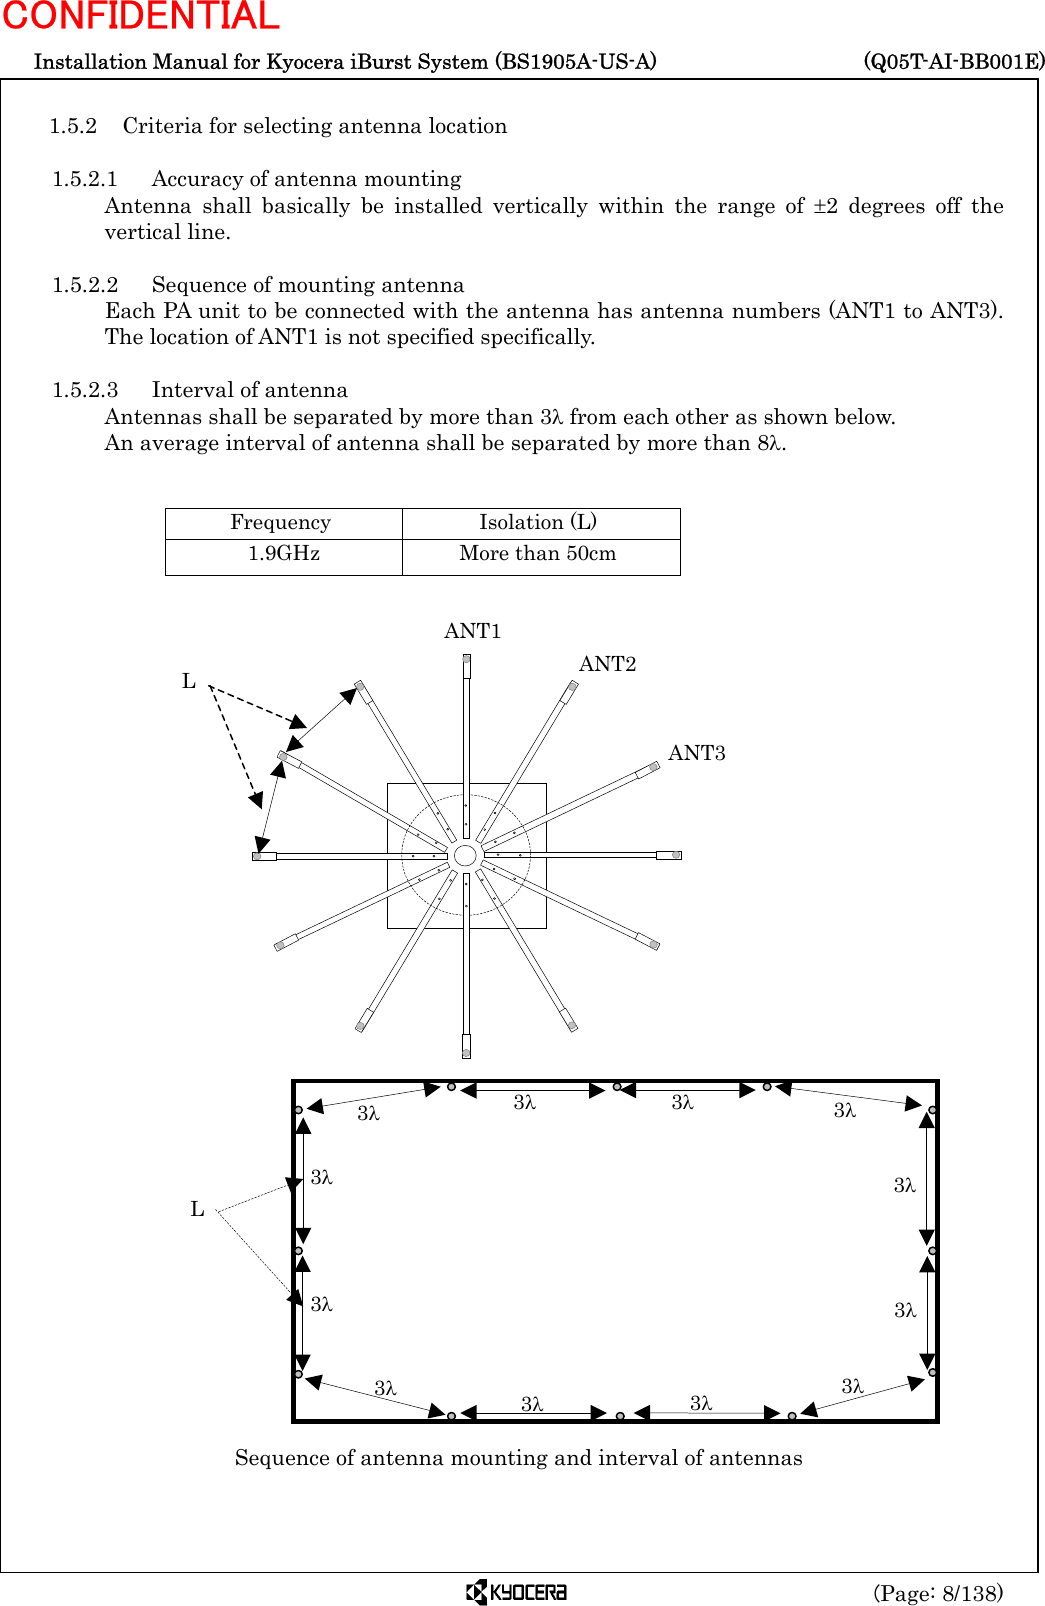  Installation Manual for Kyocera iBurst System (BS1905A-US-A)     (Q05T-AI-BB001E) (Page: 8/138) CONFIDENTIAL  1.5.2 Criteria for selecting antenna location  1.5.2.1  Accuracy of antenna mounting   Antenna shall basically be installed vertically within the range of ±2 degrees off the vertical line.  1.5.2.2  Sequence of mounting antenna Each PA unit to be connected with the antenna has antenna numbers (ANT1 to ANT3). The location of ANT1 is not specified specifically.  1.5.2.3  Interval of antenna Antennas shall be separated by more than 3λ from each other as shown below. An average interval of antenna shall be separated by more than 8λ.   Frequency Isolation (L) 1.9GHz  More than 50cm                                  Sequence of antenna mounting and interval of antennas ANT1 ANT2 ANT3 L L 3λ 3λ 3λ 3λ 3λ 3λ 3λ 3λ 3λ 3λ 3λ 3λ 